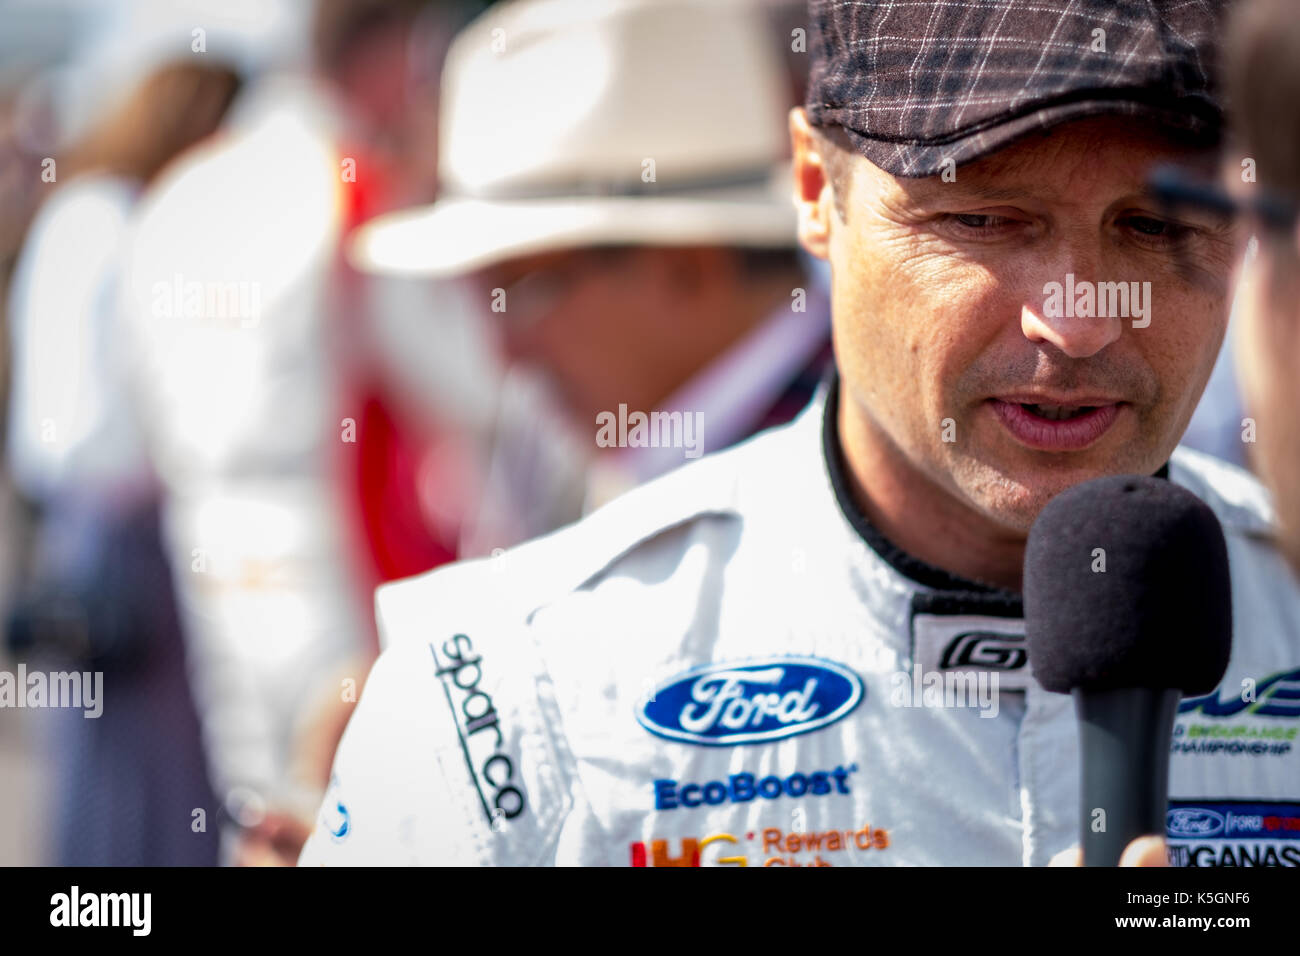 Chichester, West Sussex, UK. 9th September, 2017. WEC racing driver Andy Priaulx during the Goodwood Revival at the Goodwood Circuit Credit: Gergo Toth/Alamy Live News Stock Photo